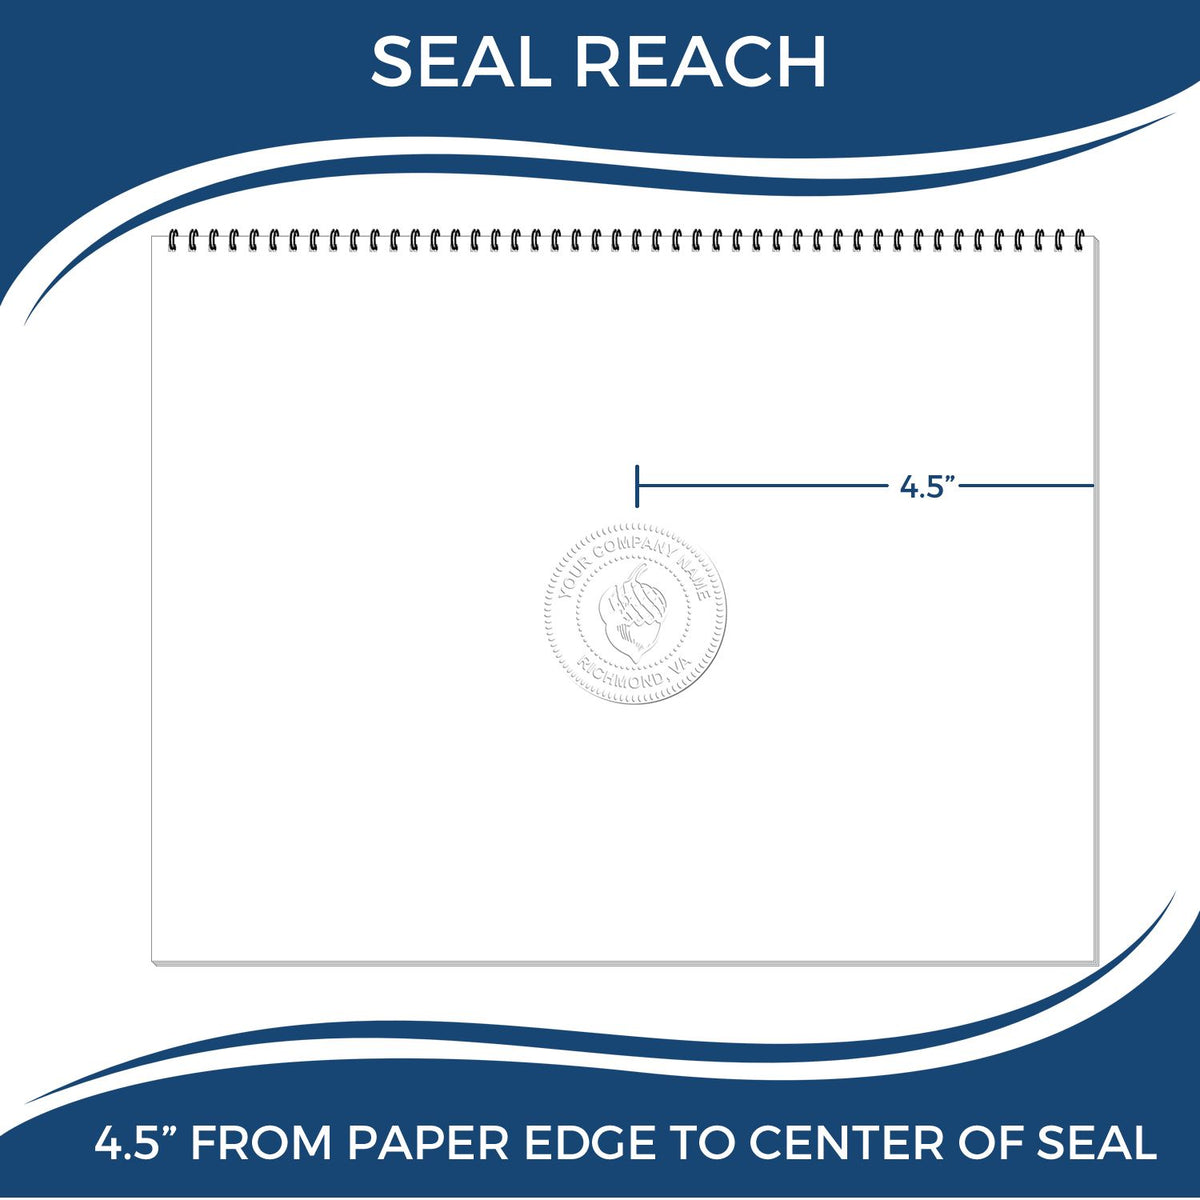 An infographic showing the seal reach which is represented by a ruler and a miniature seal image of the Extended Long Reach Arizona Architect Seal Embosser